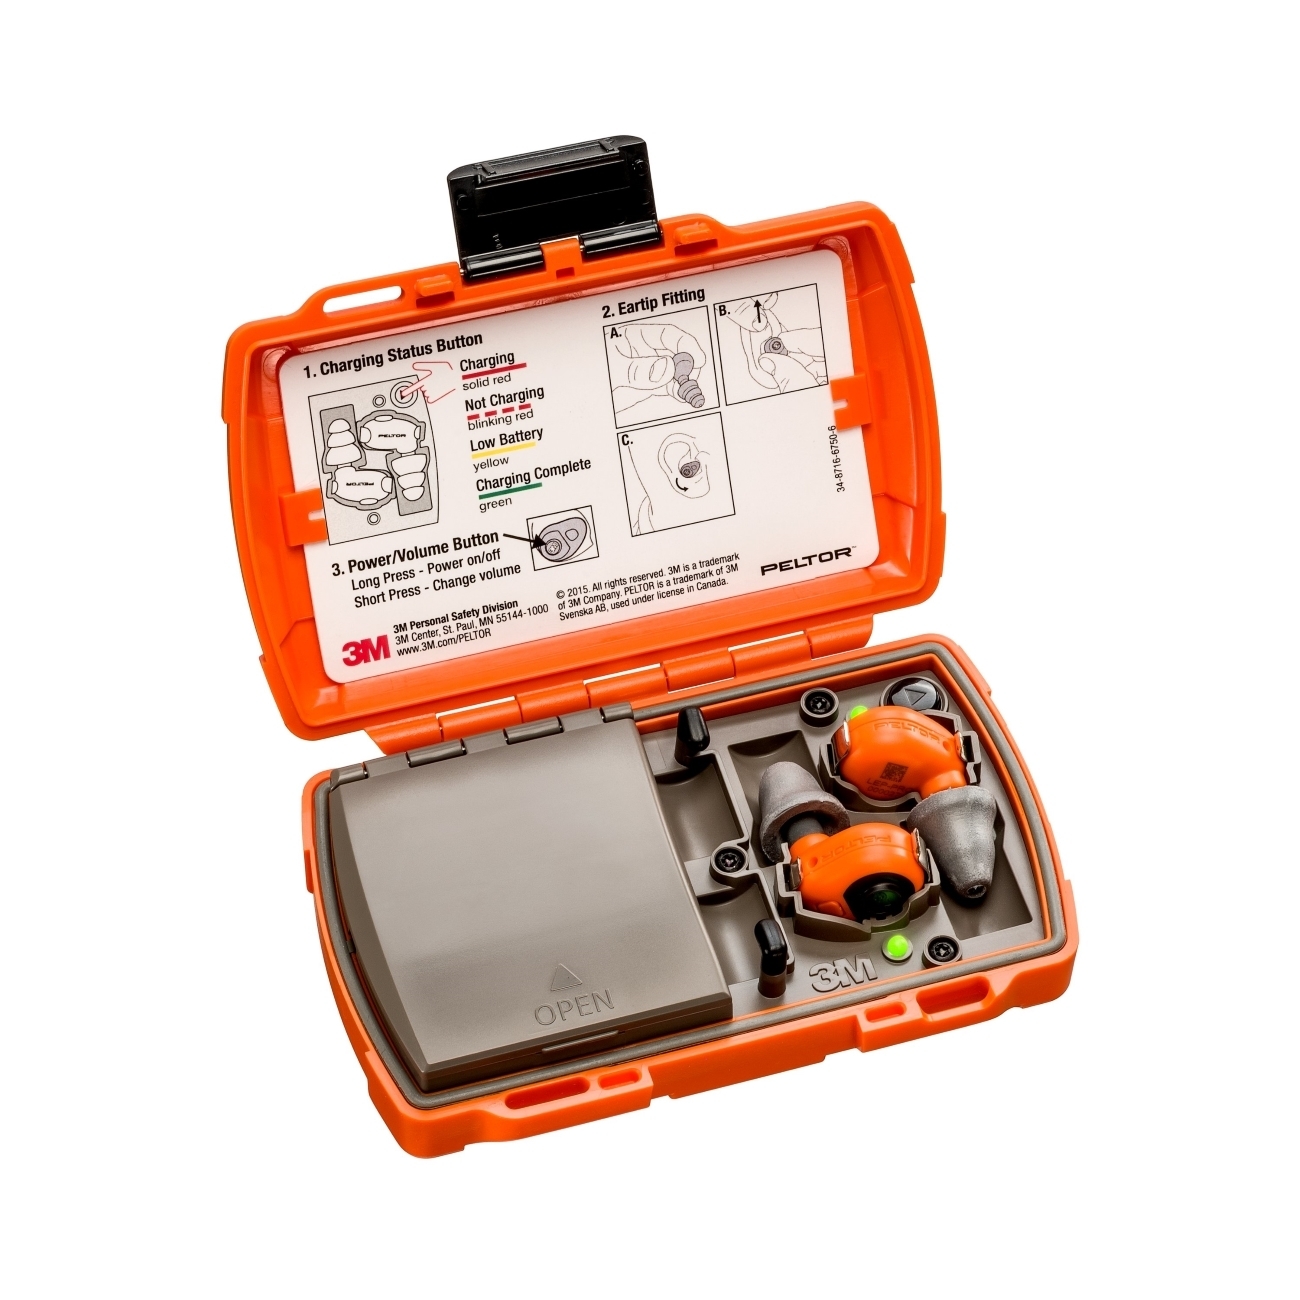 3M Peltor LEP-200 EU orange with additional antenna for cordless reception of audio signals, set: earplugs and charging station (with closed lid and USB ports) are IP-54 rated and waterproof (30 min. immersion up to 1m depth)